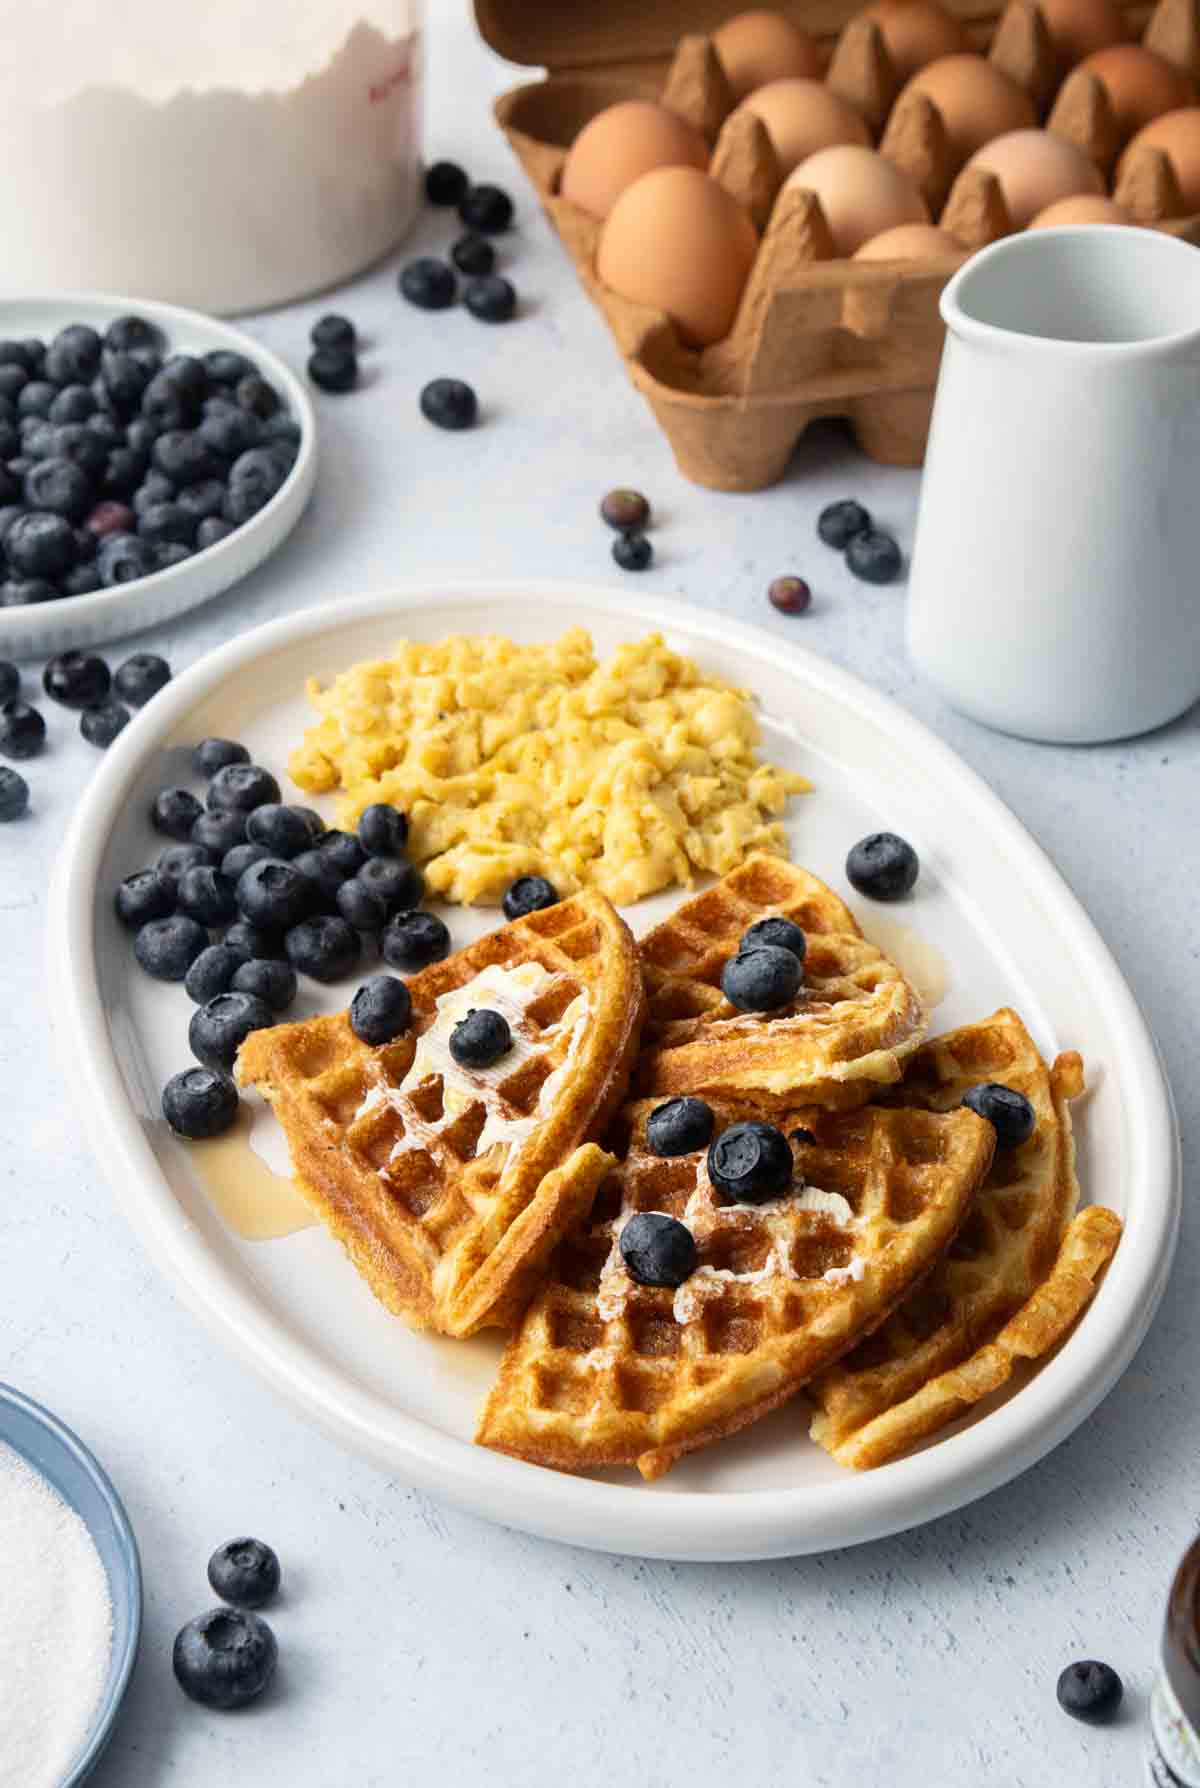 oval plate with waffle quarters, blueberries, and eggs on it